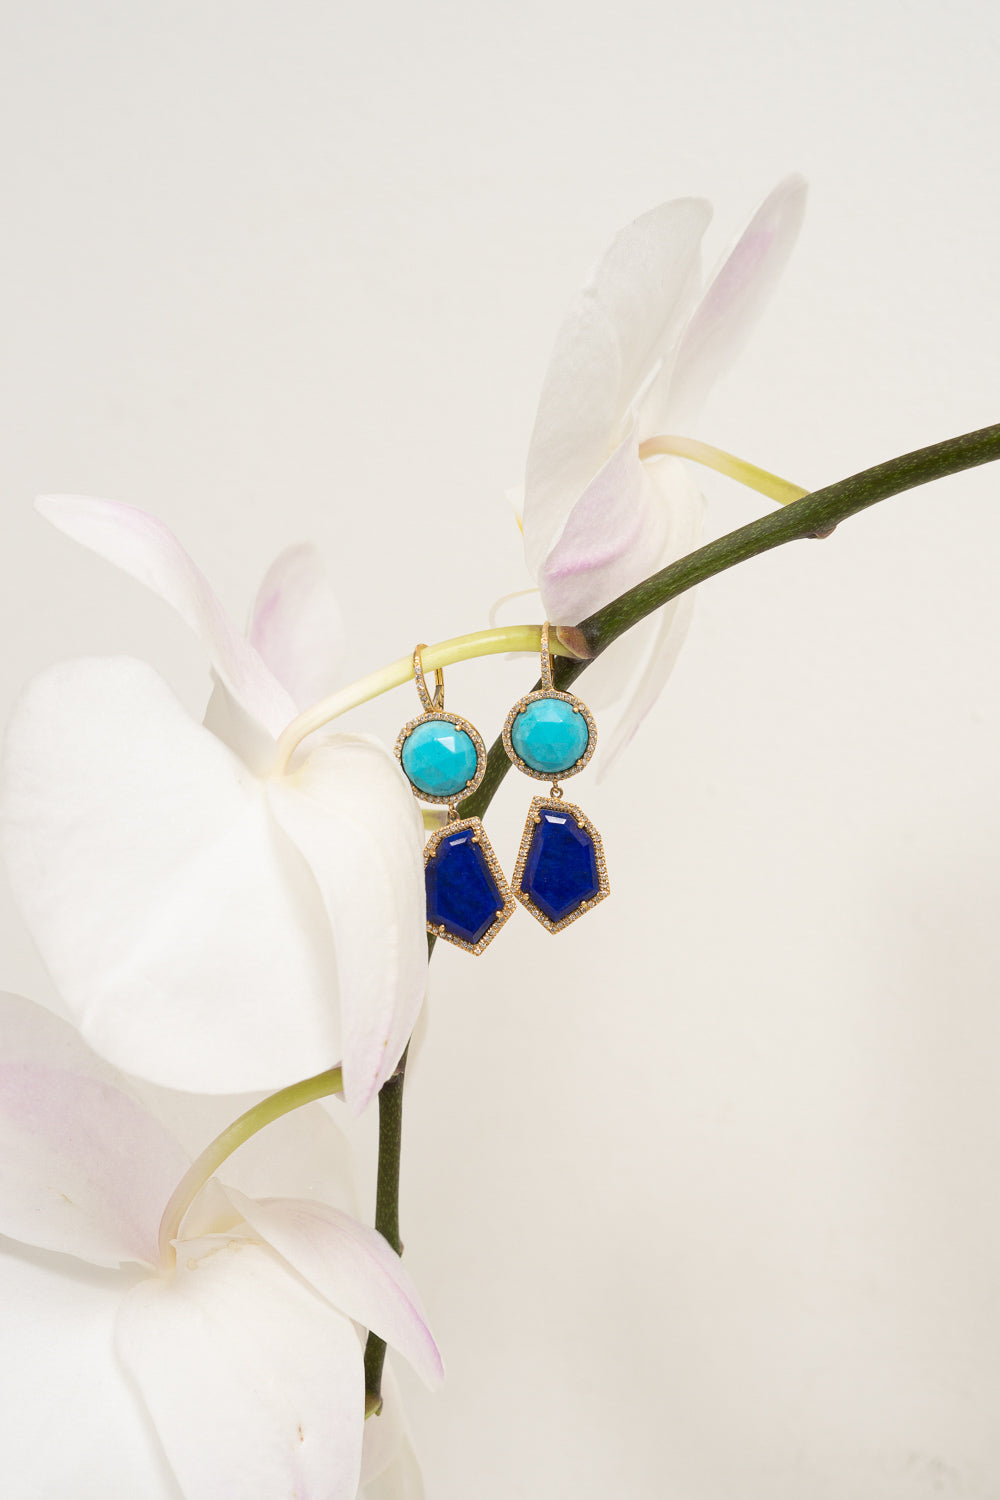 rose cut sleeping beauty turquoise and lapis diamond pave earrings janna Conner on orchid